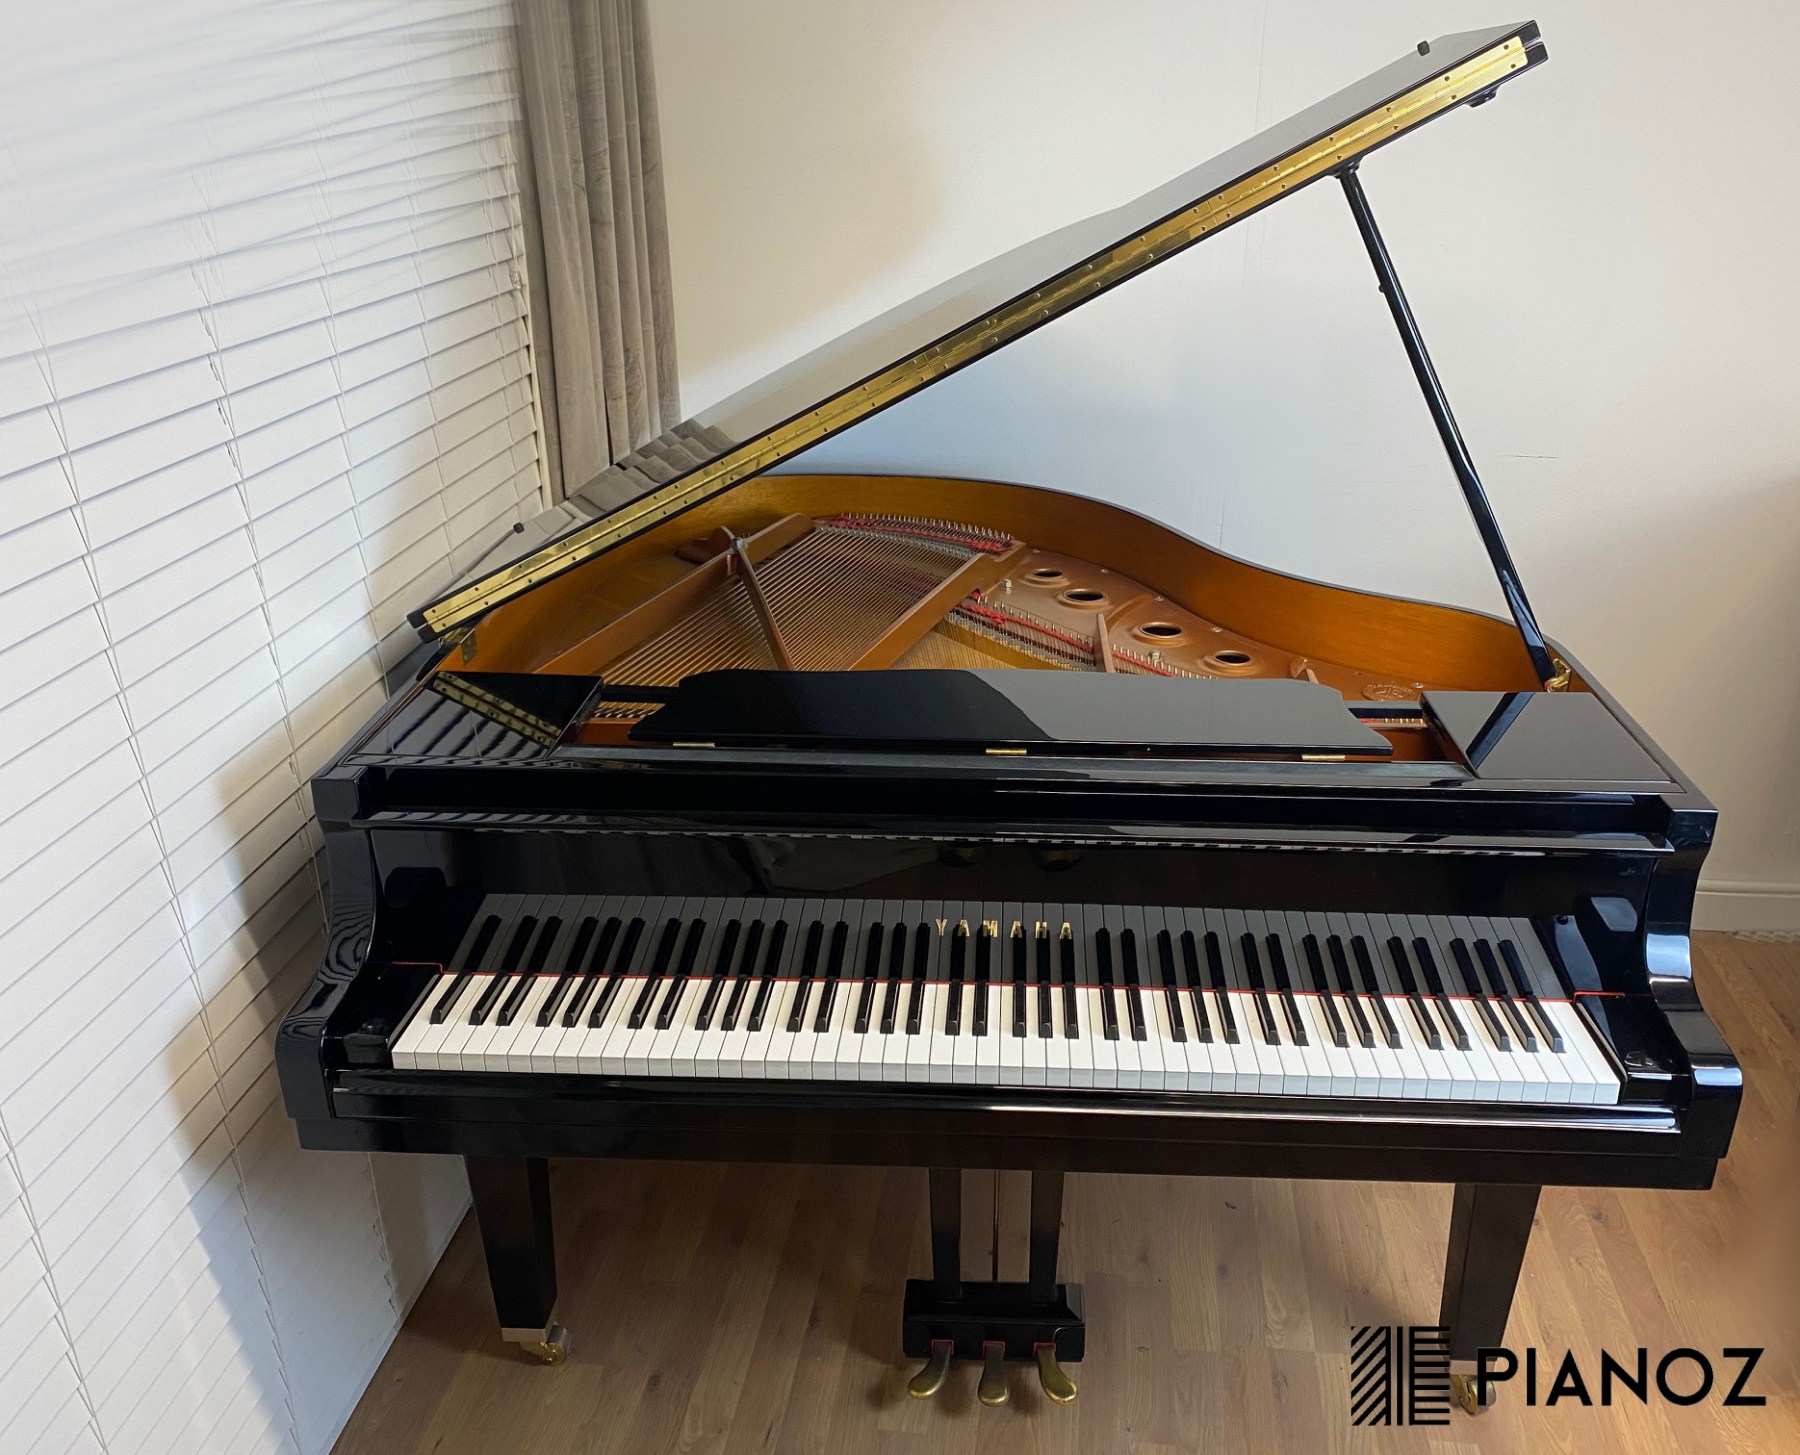 Yamaha GB1 Baby Grand Piano piano for sale in UK